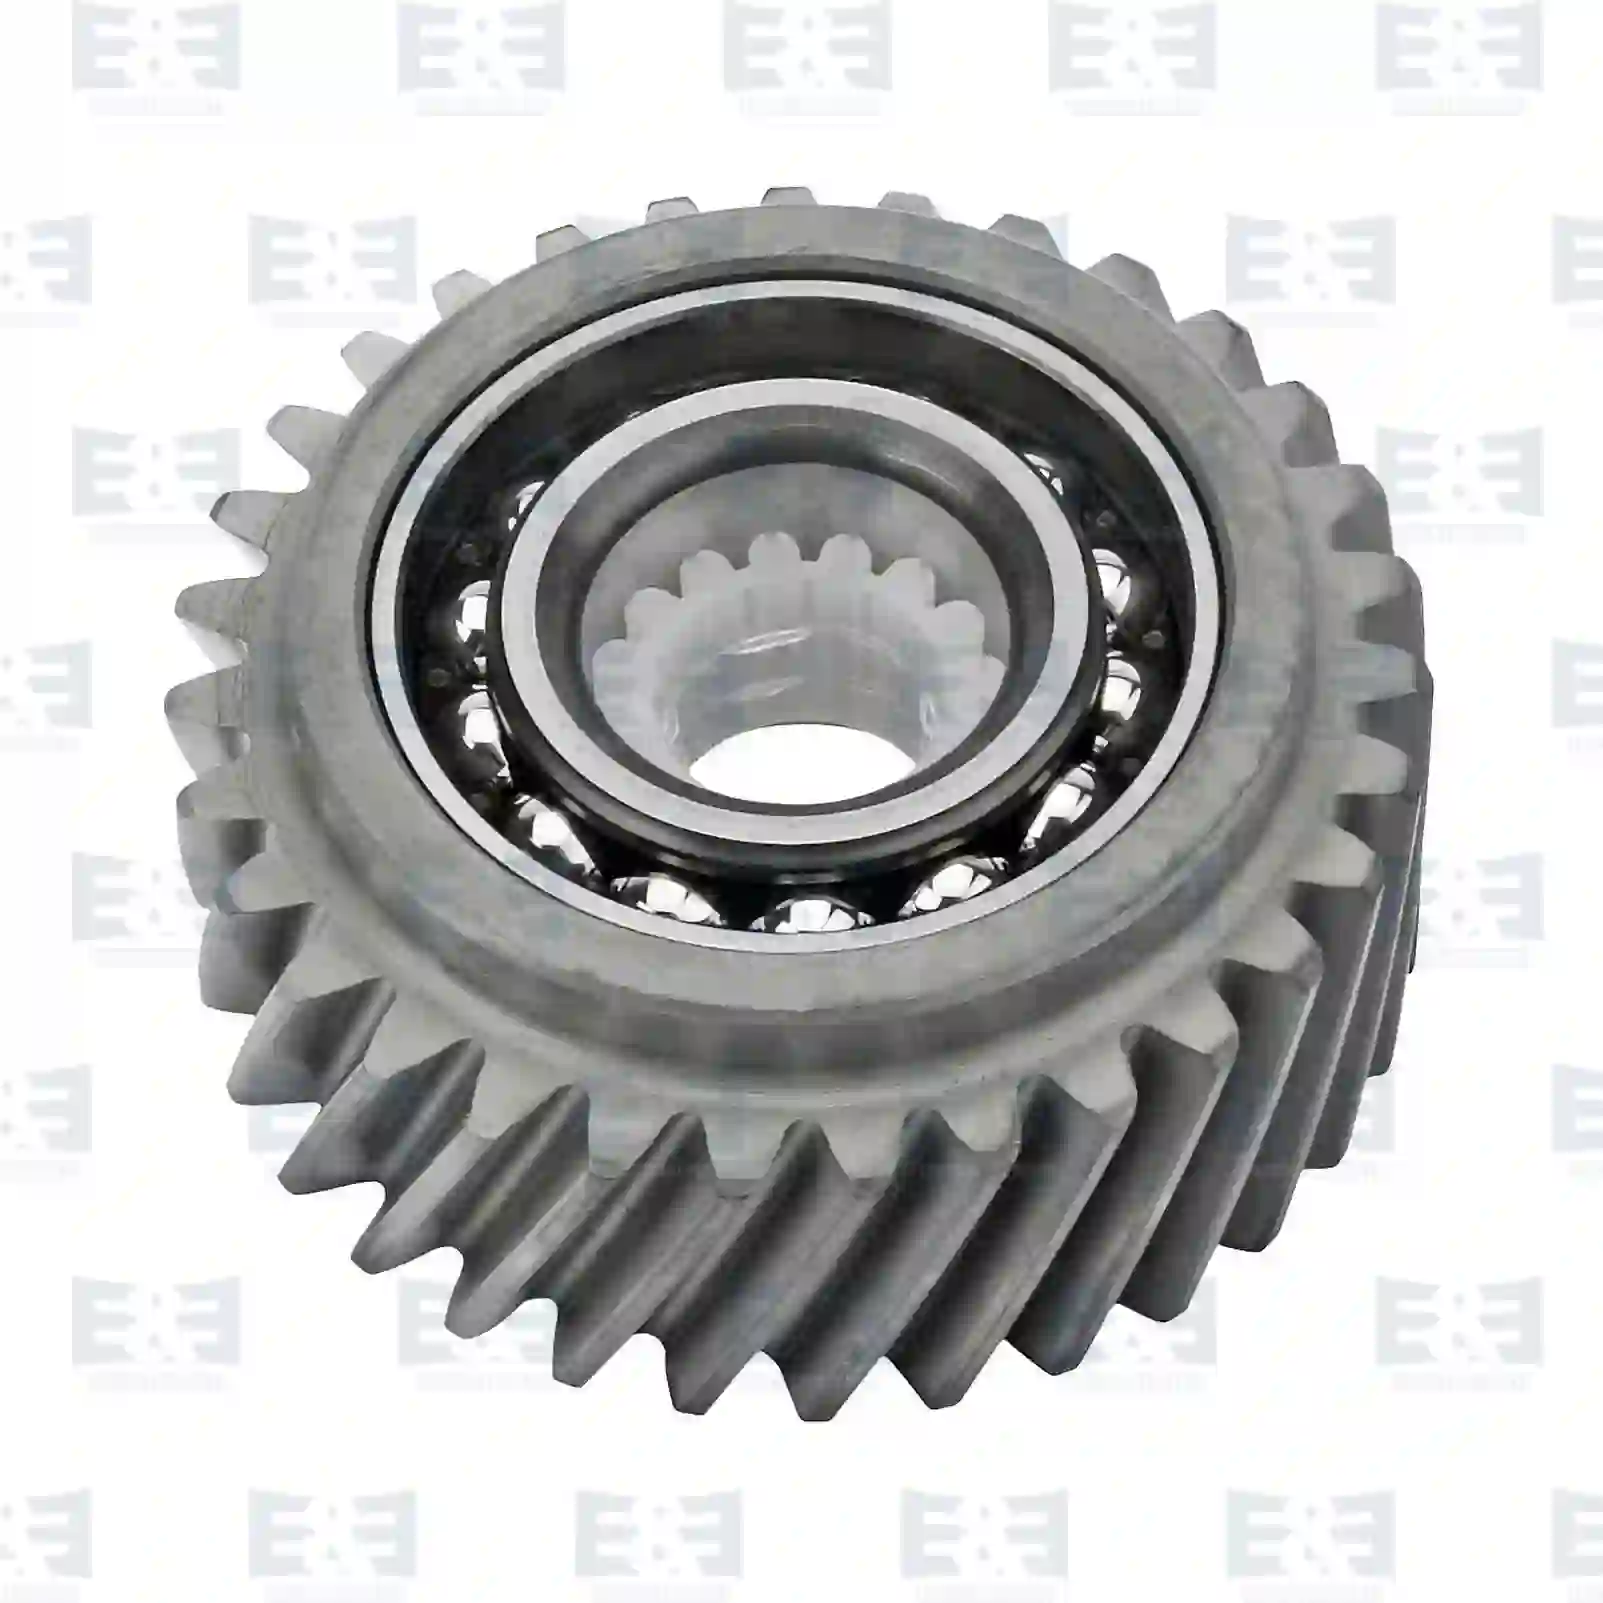  Gear, complete with bearing || E&E Truck Spare Parts | Truck Spare Parts, Auotomotive Spare Parts